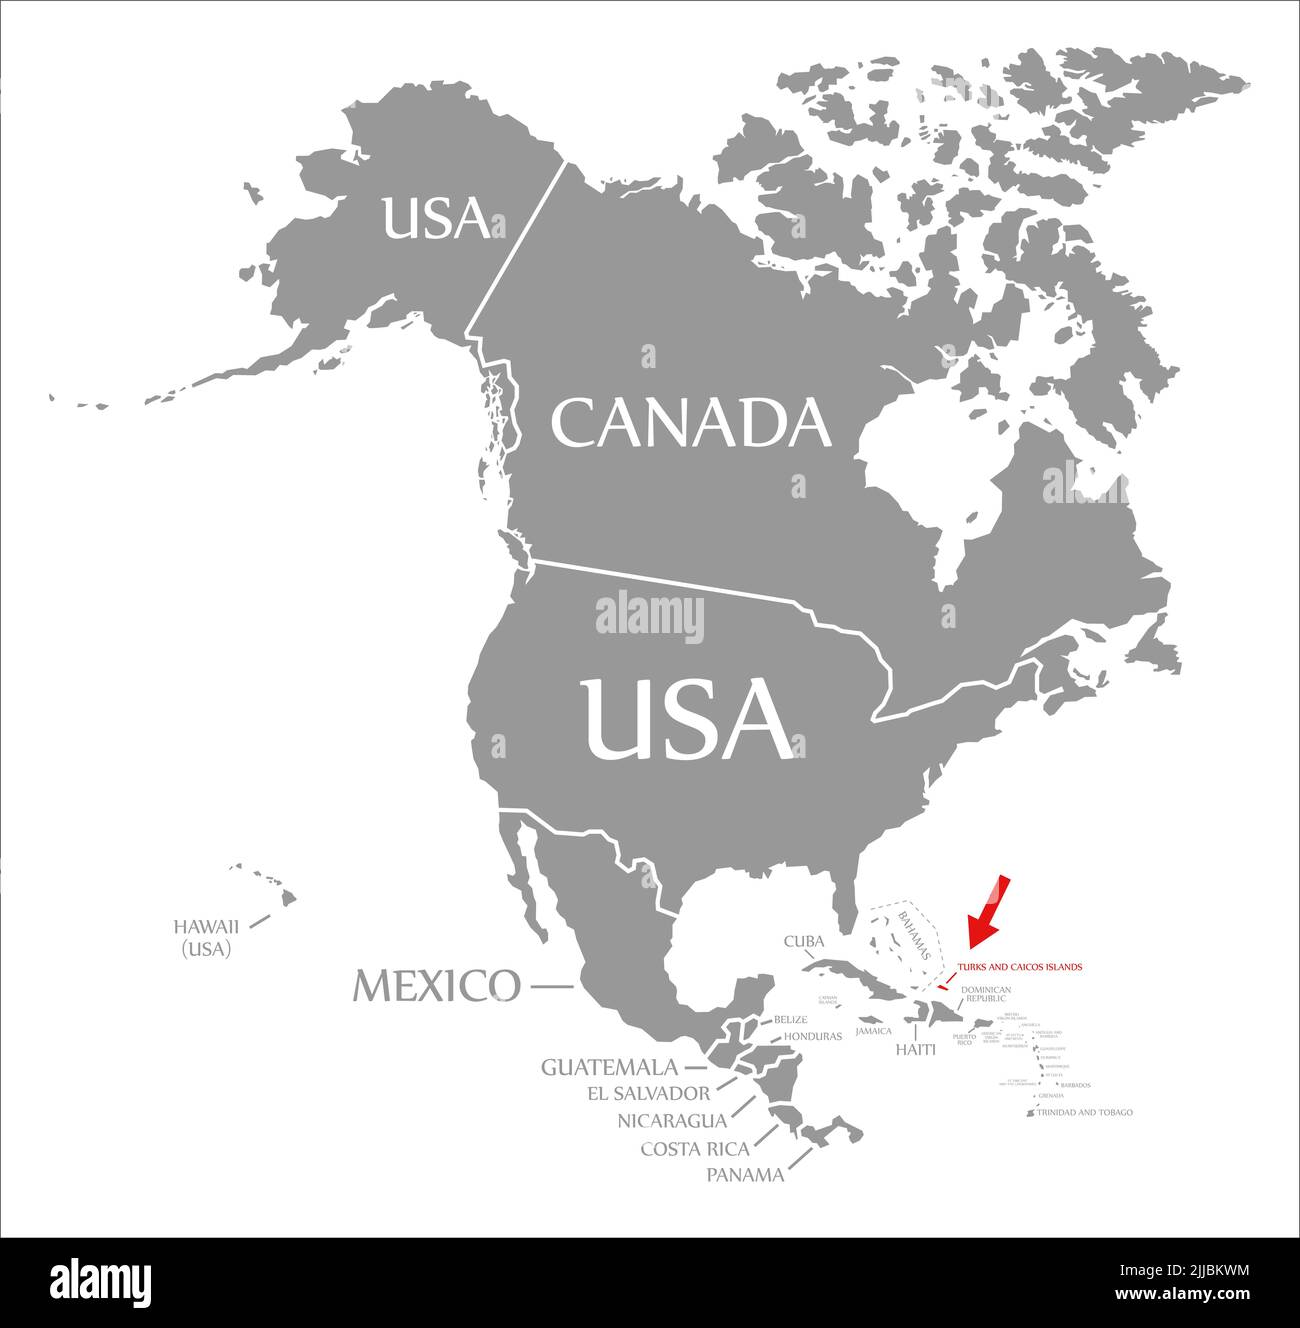 Turks and Caicos Islands red highlighted in map of North America Stock Photo